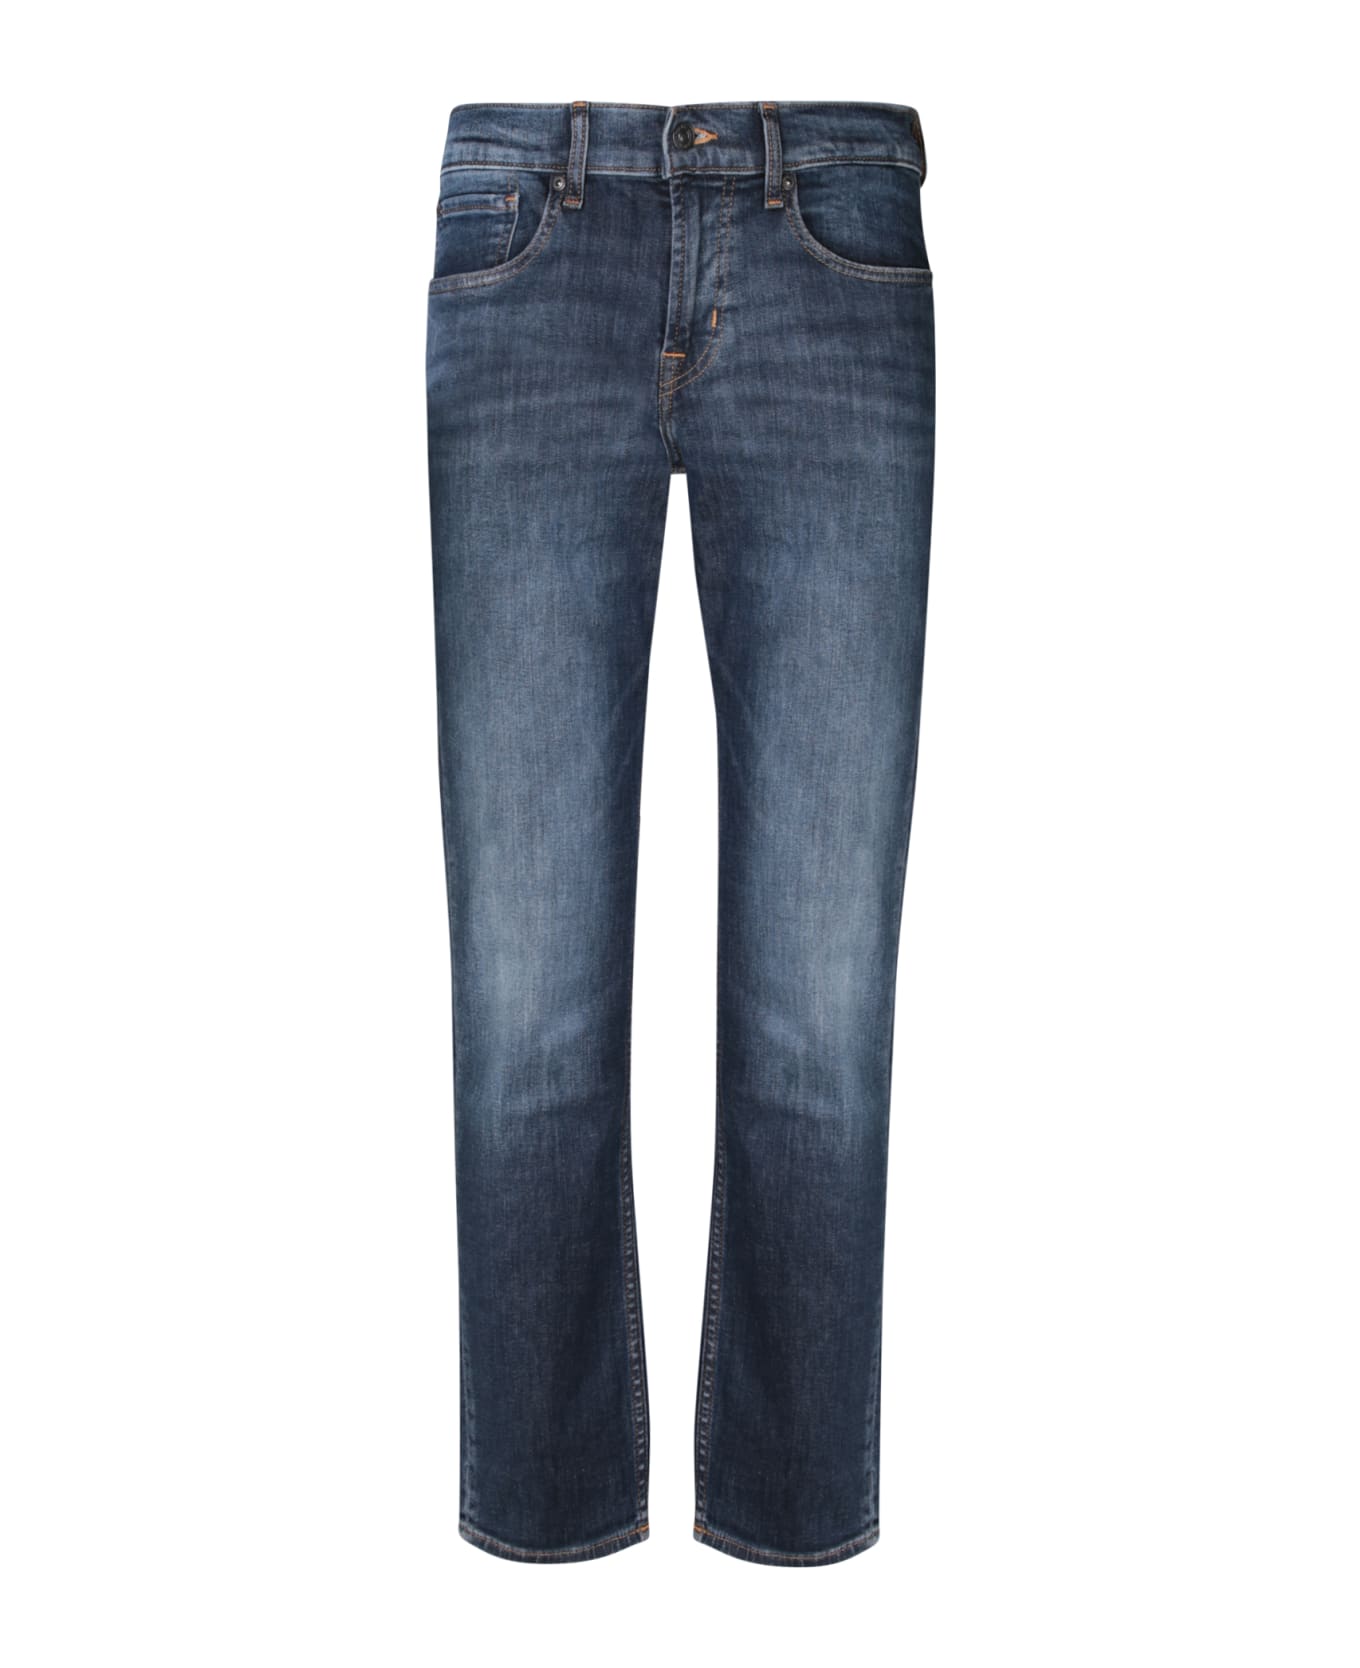 7 For All Mankind Slimmy Tapered Dark Blue Jeans - Blue